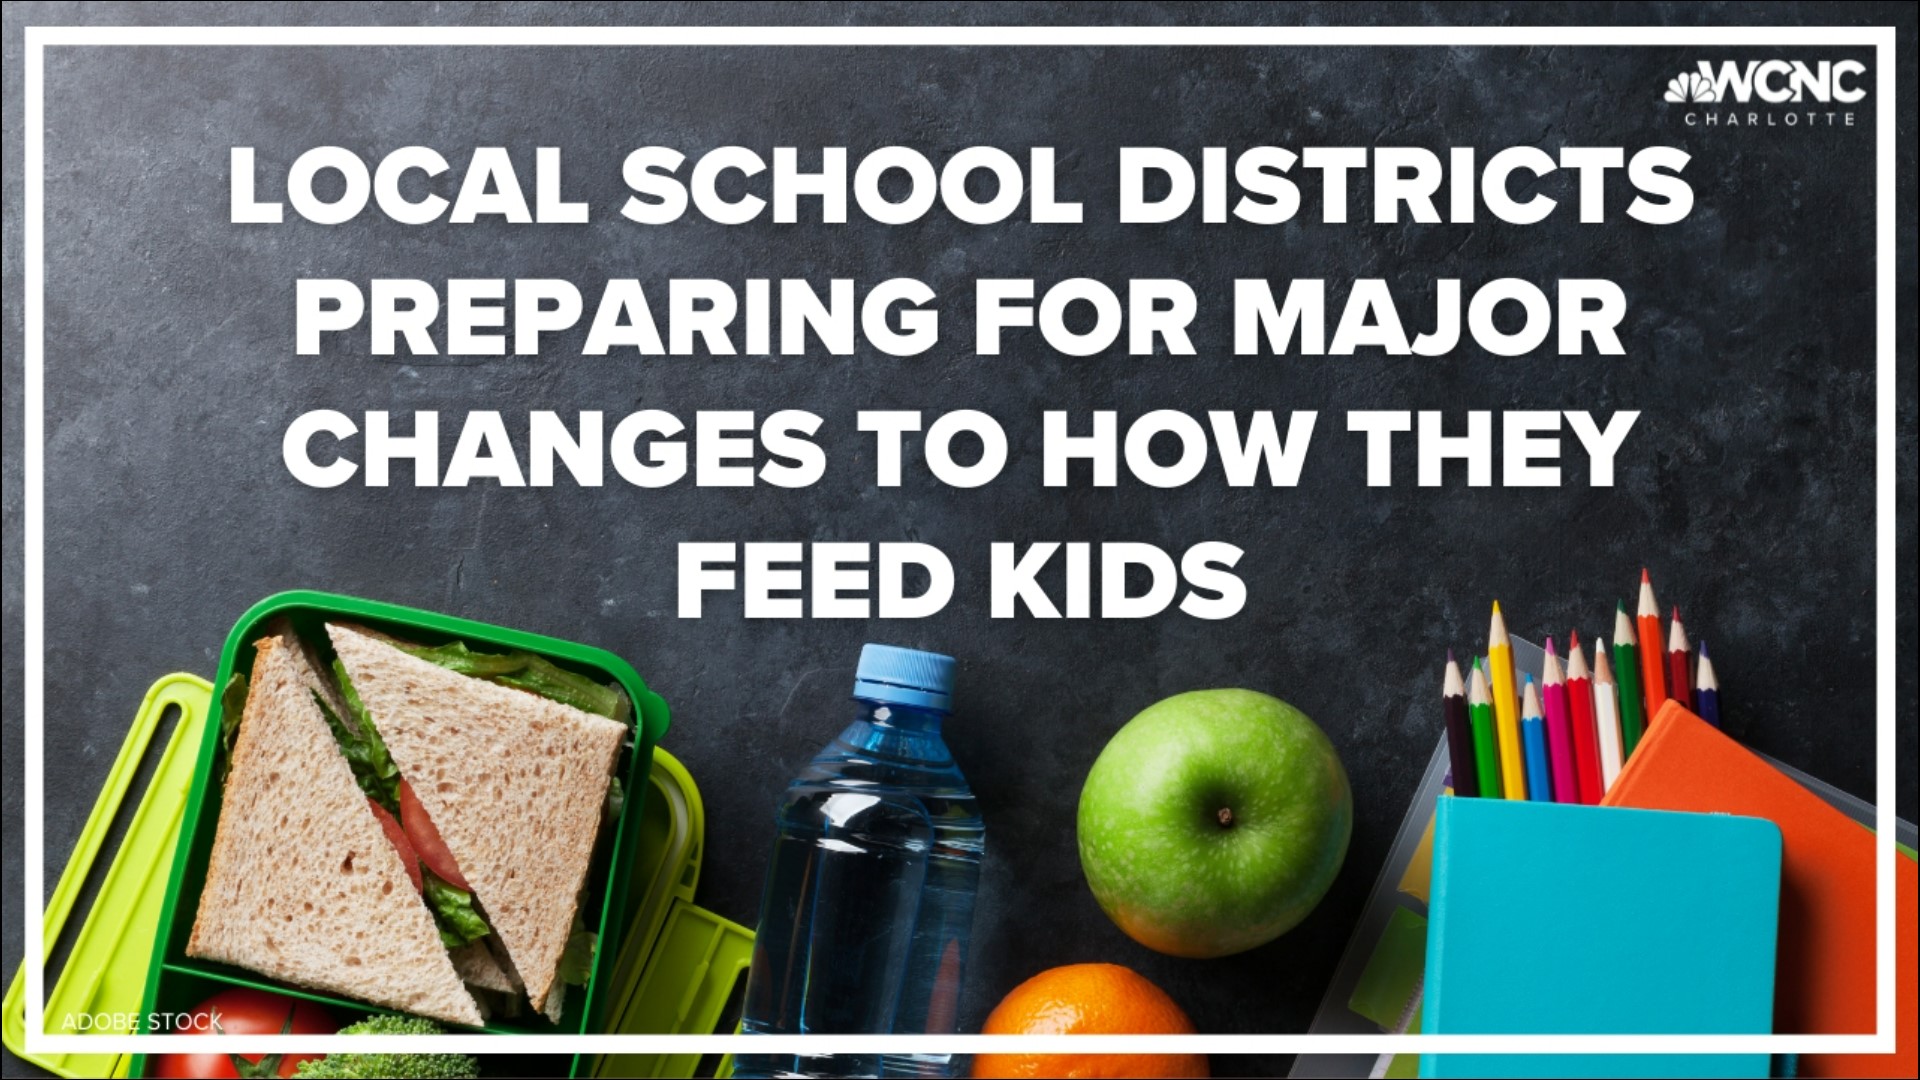 For two years all students, regardless of their families' income, got free school lunch. This won't happen anymore